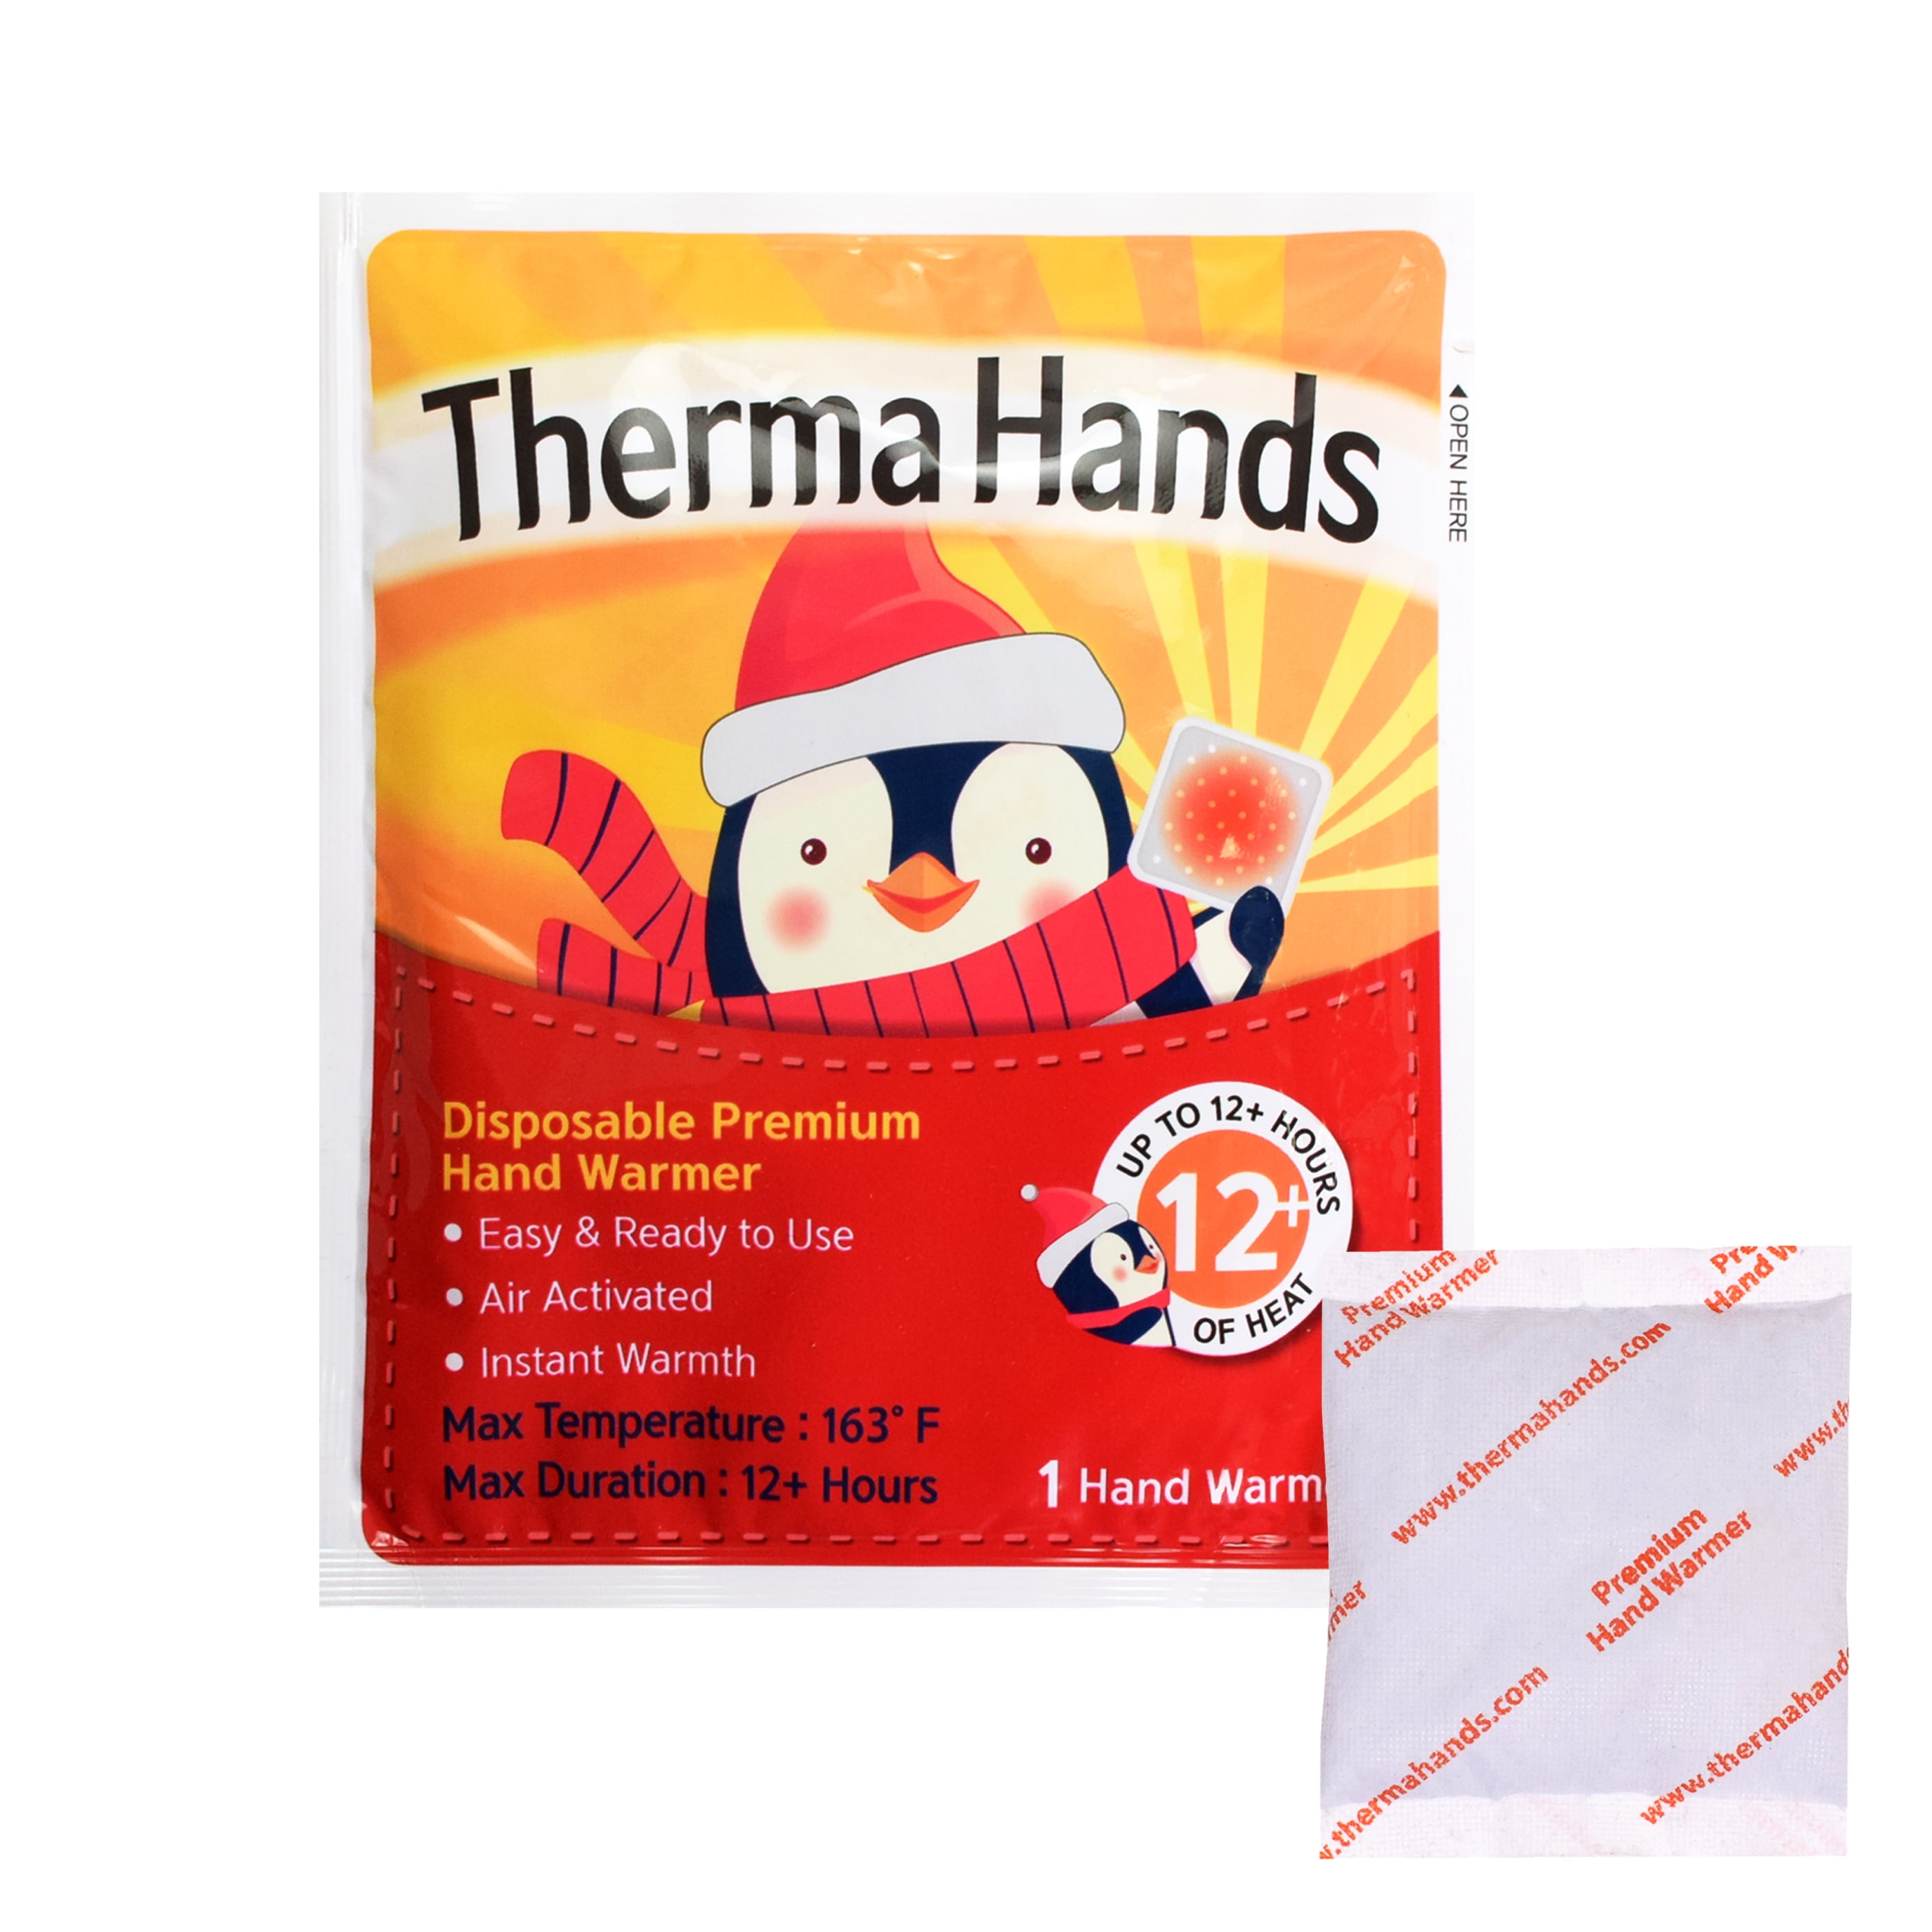 Natural Air-Activated Odorless ThermaHands Hand Warmers Convenient Size: 3.5 inch x 4 inch, Duration: 12+ Hours, Max Temp: 163 F Safe Premium Quality Long Lasting Hand Warmer